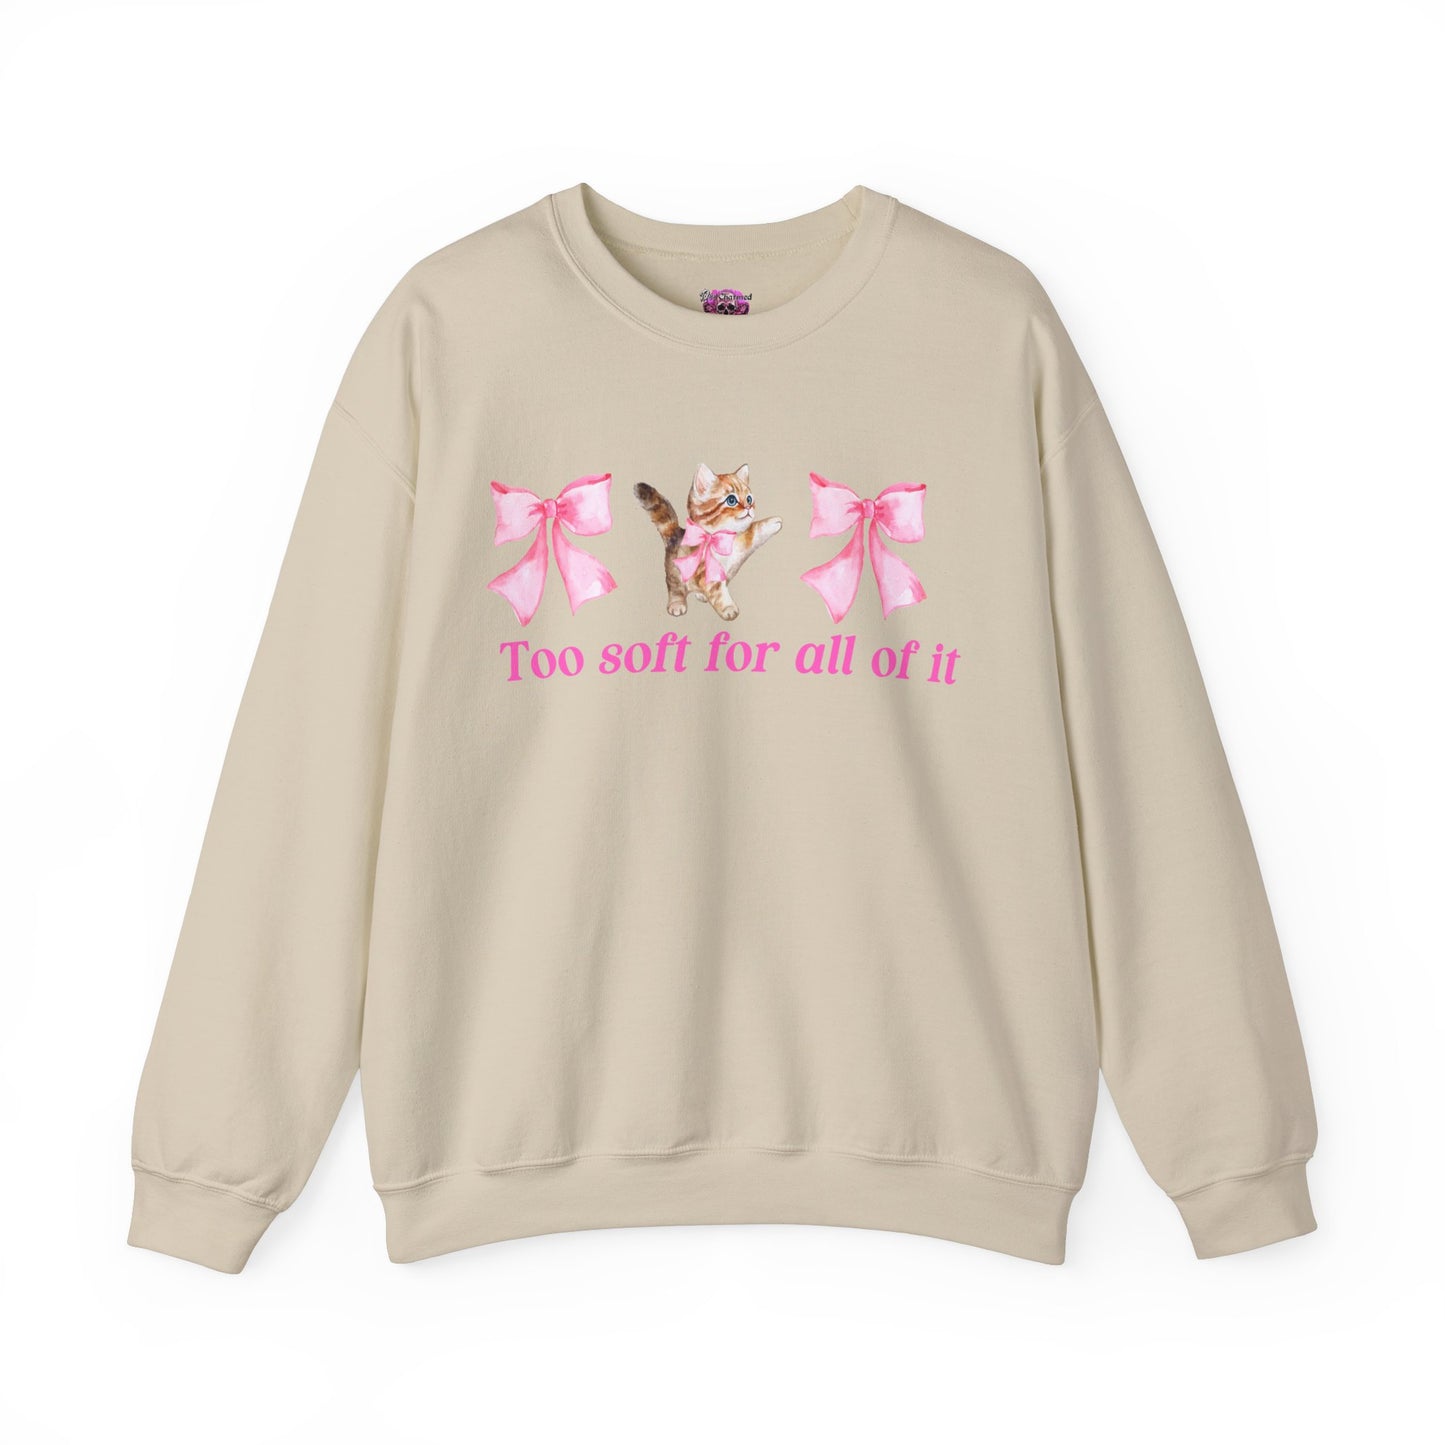 Too soft for all of it Crewneck